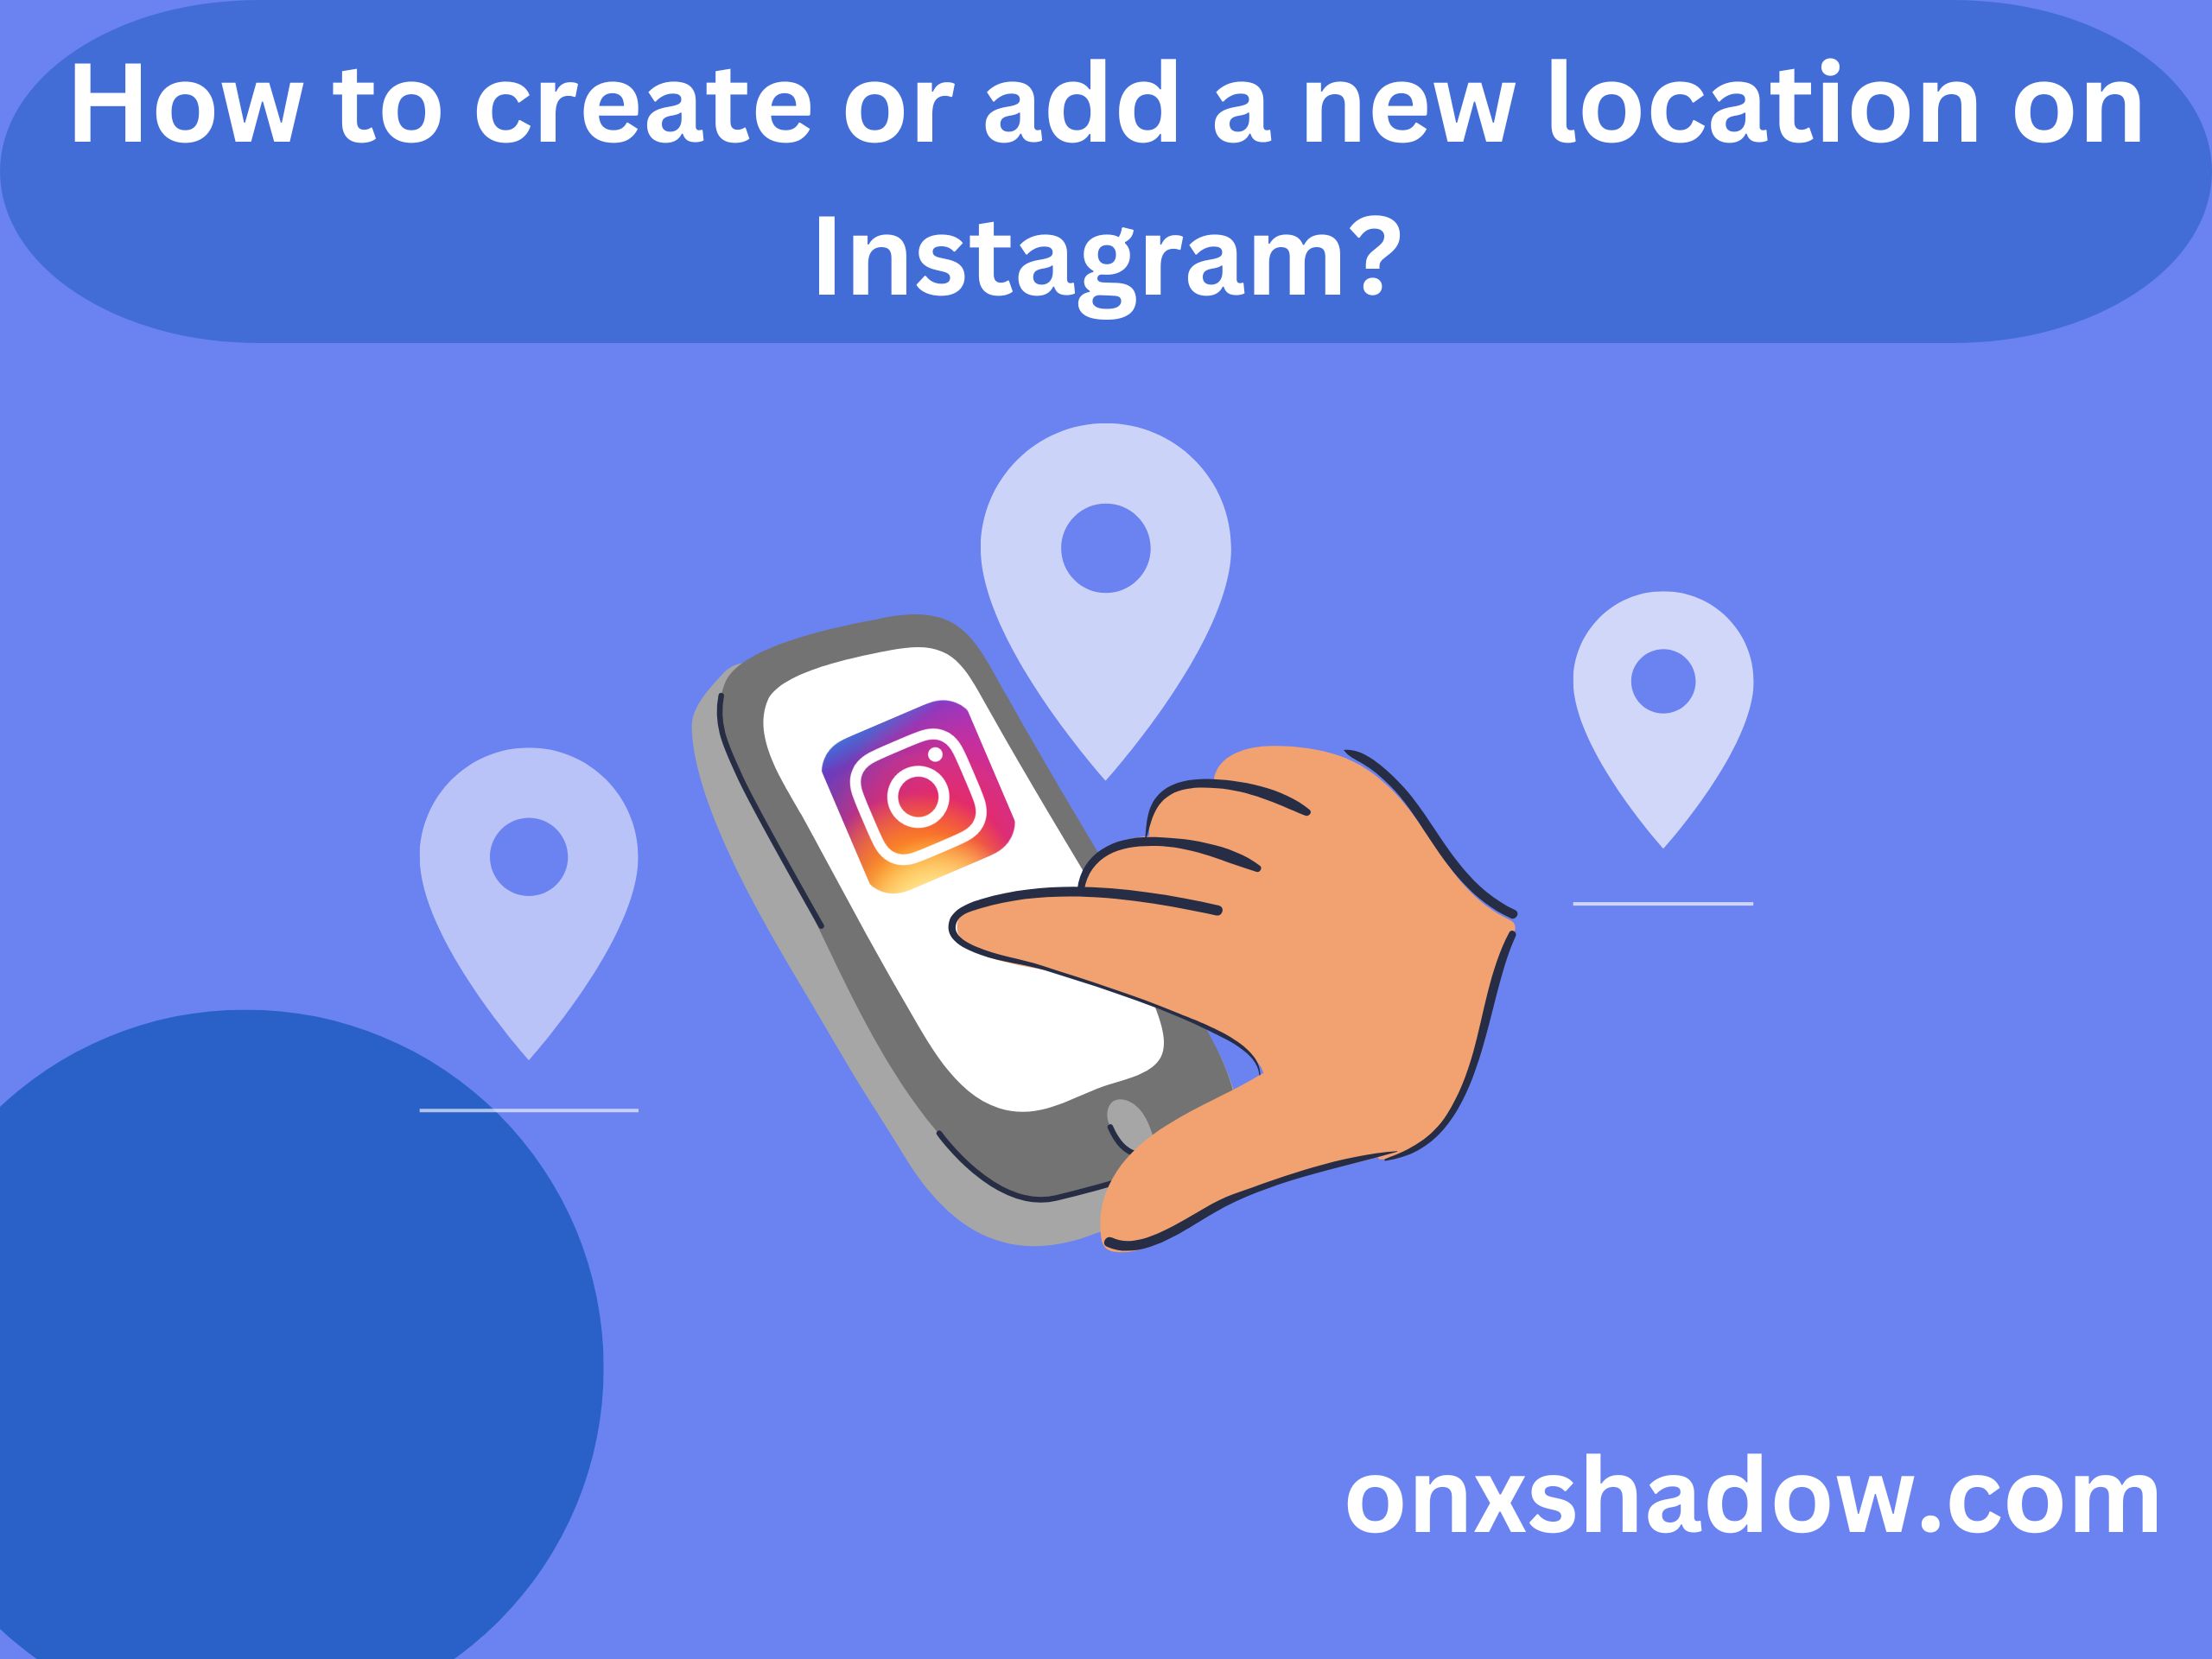 How to create or add a new location on Instagram?